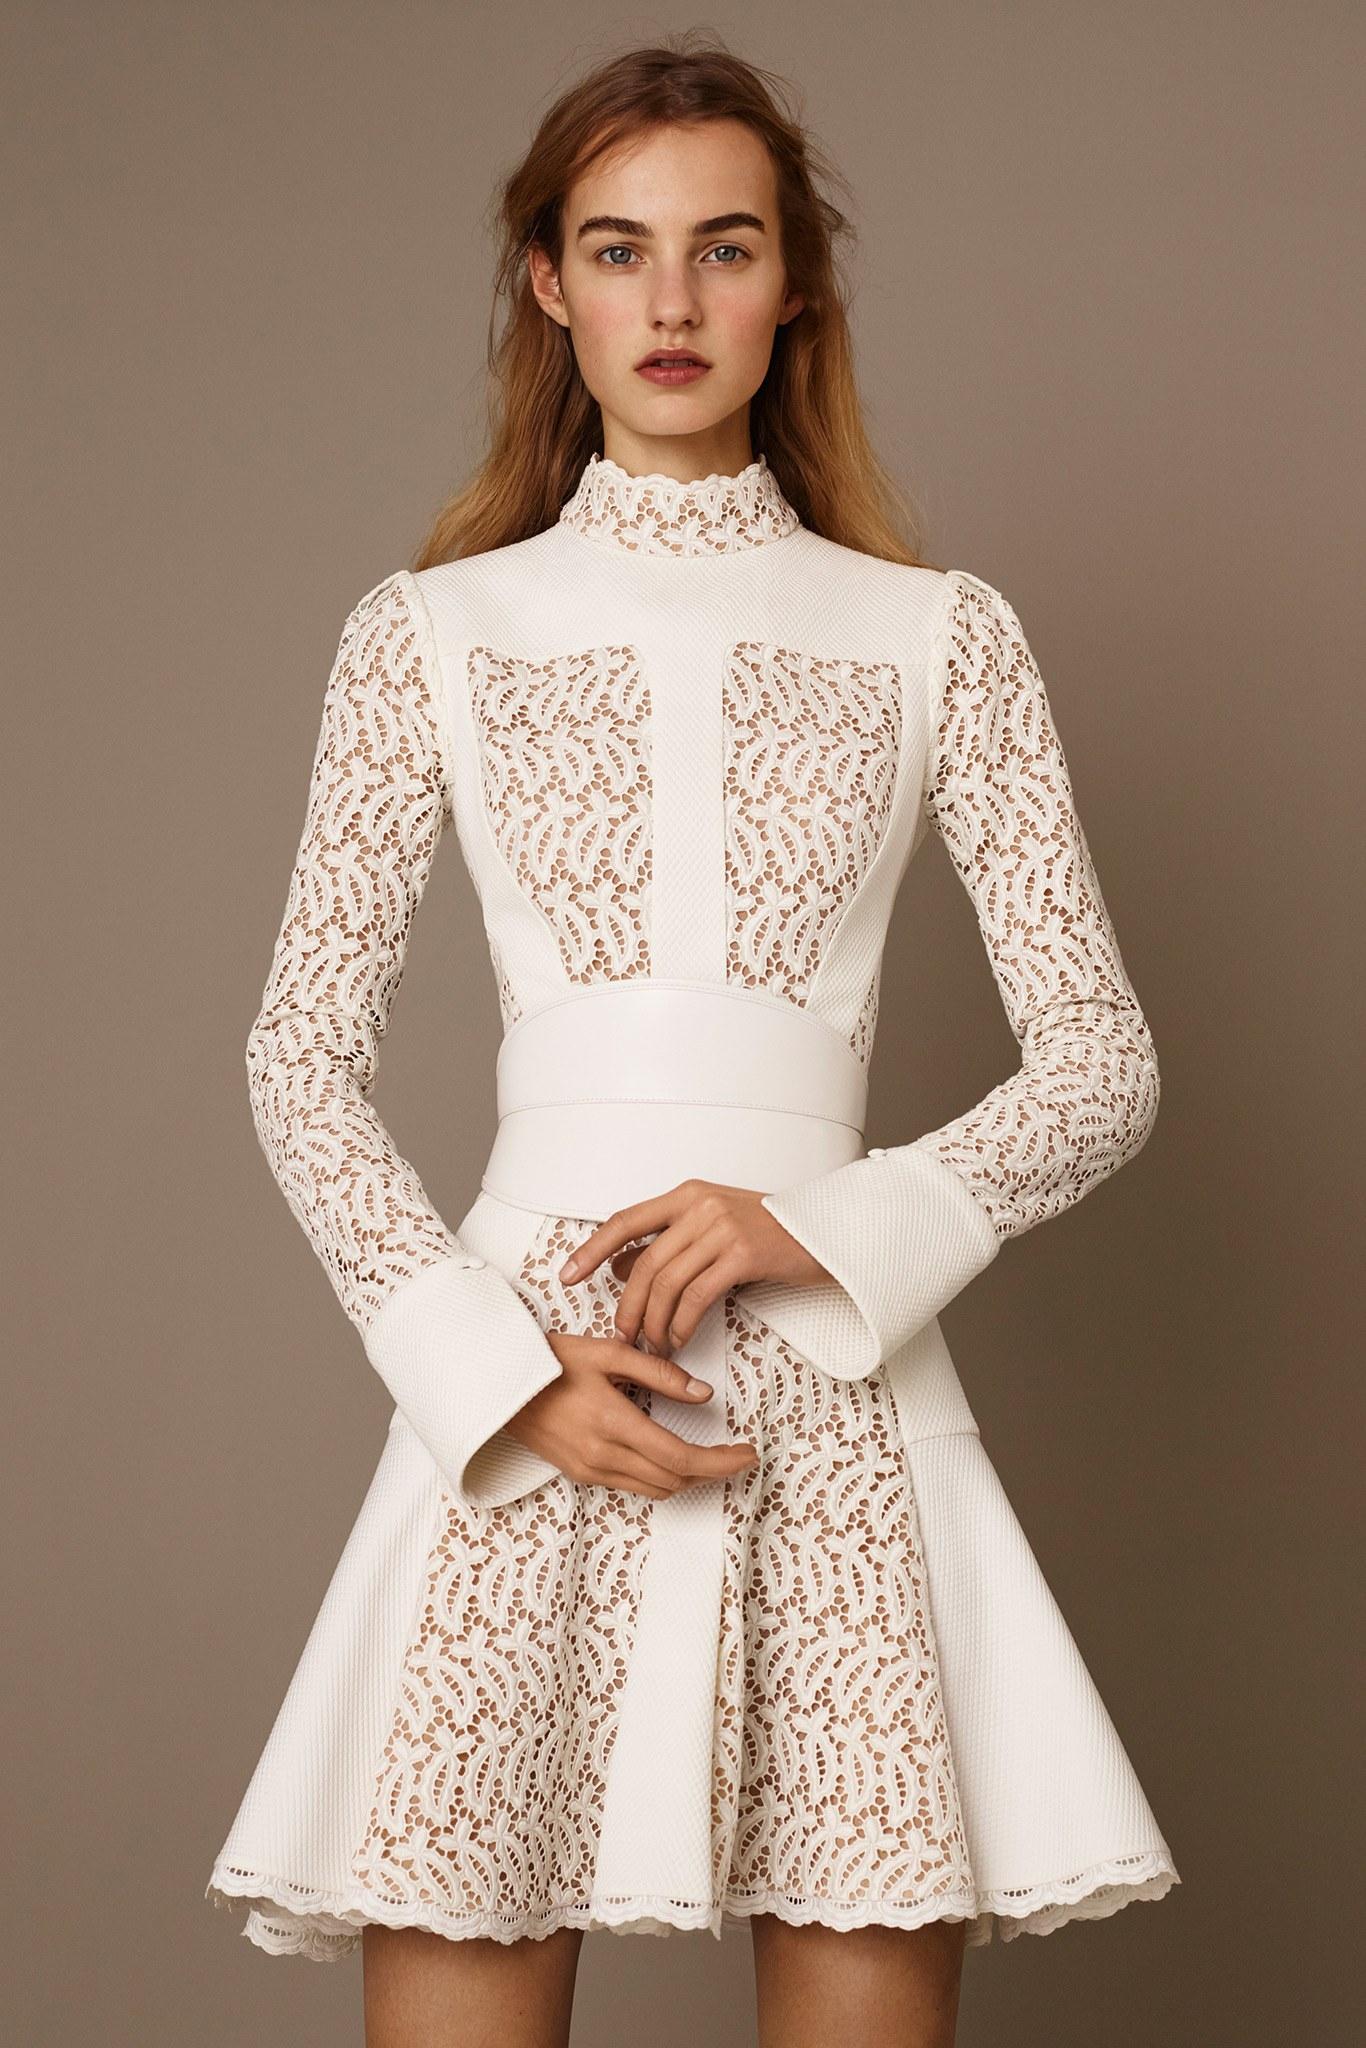 ALEXANDER MCQUEEN Pre-Fall 2015 cocktail dress comes in a cream textured fabric with lace insert panels, high lace stand up collar, long sleeves with folded cuffs, drop waist pleated skirt, and tan beige liner. Belt available separately. Made in